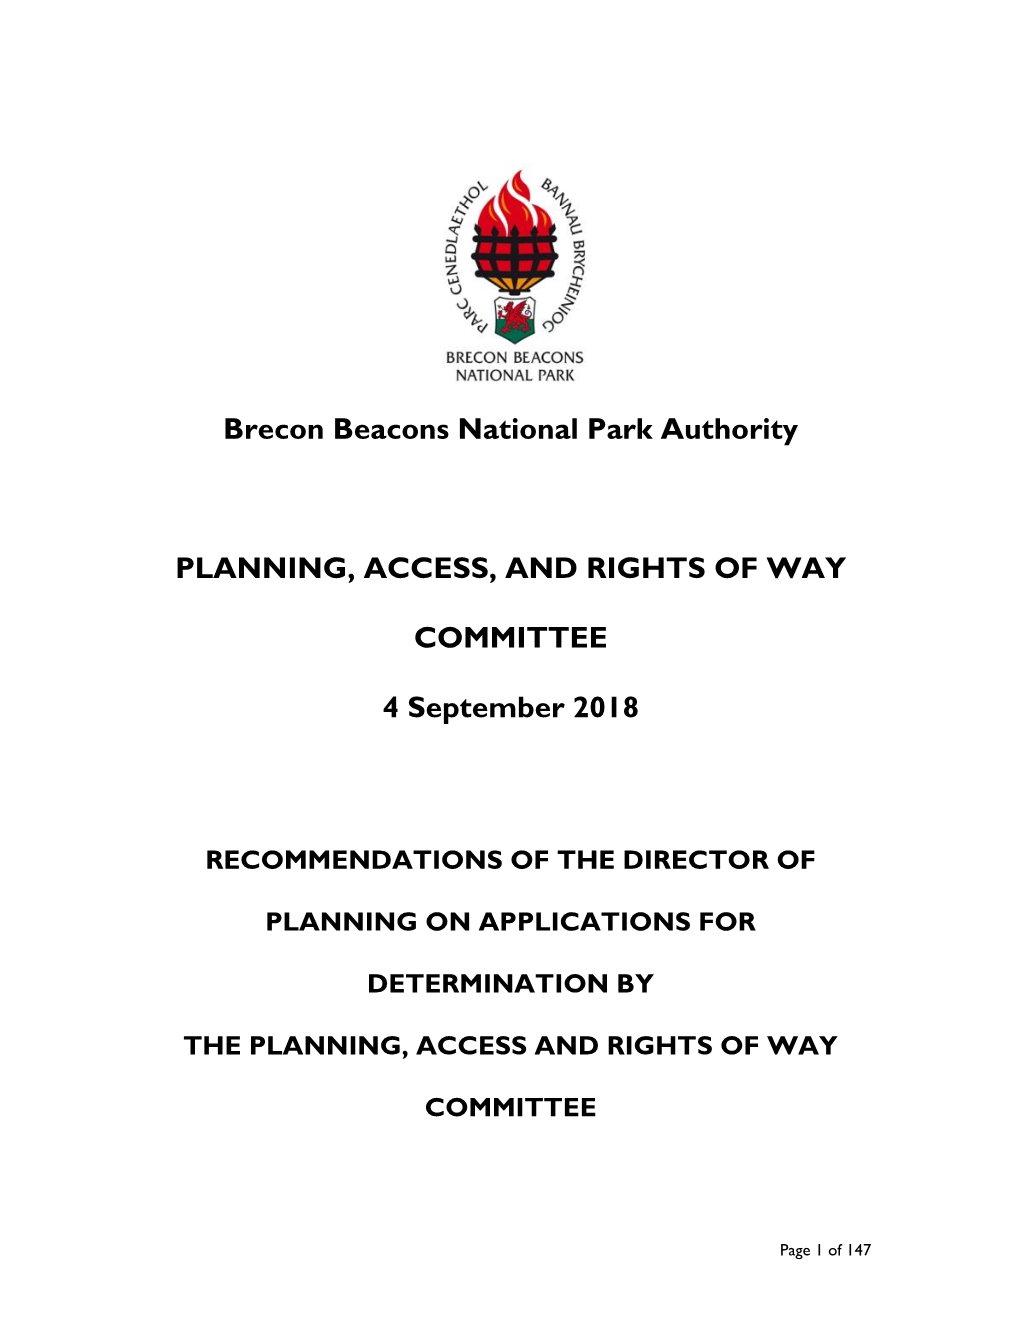 Recommendations of the Director of Planning on Applications for Determination by the Planning, Access and Rights of Way Committee